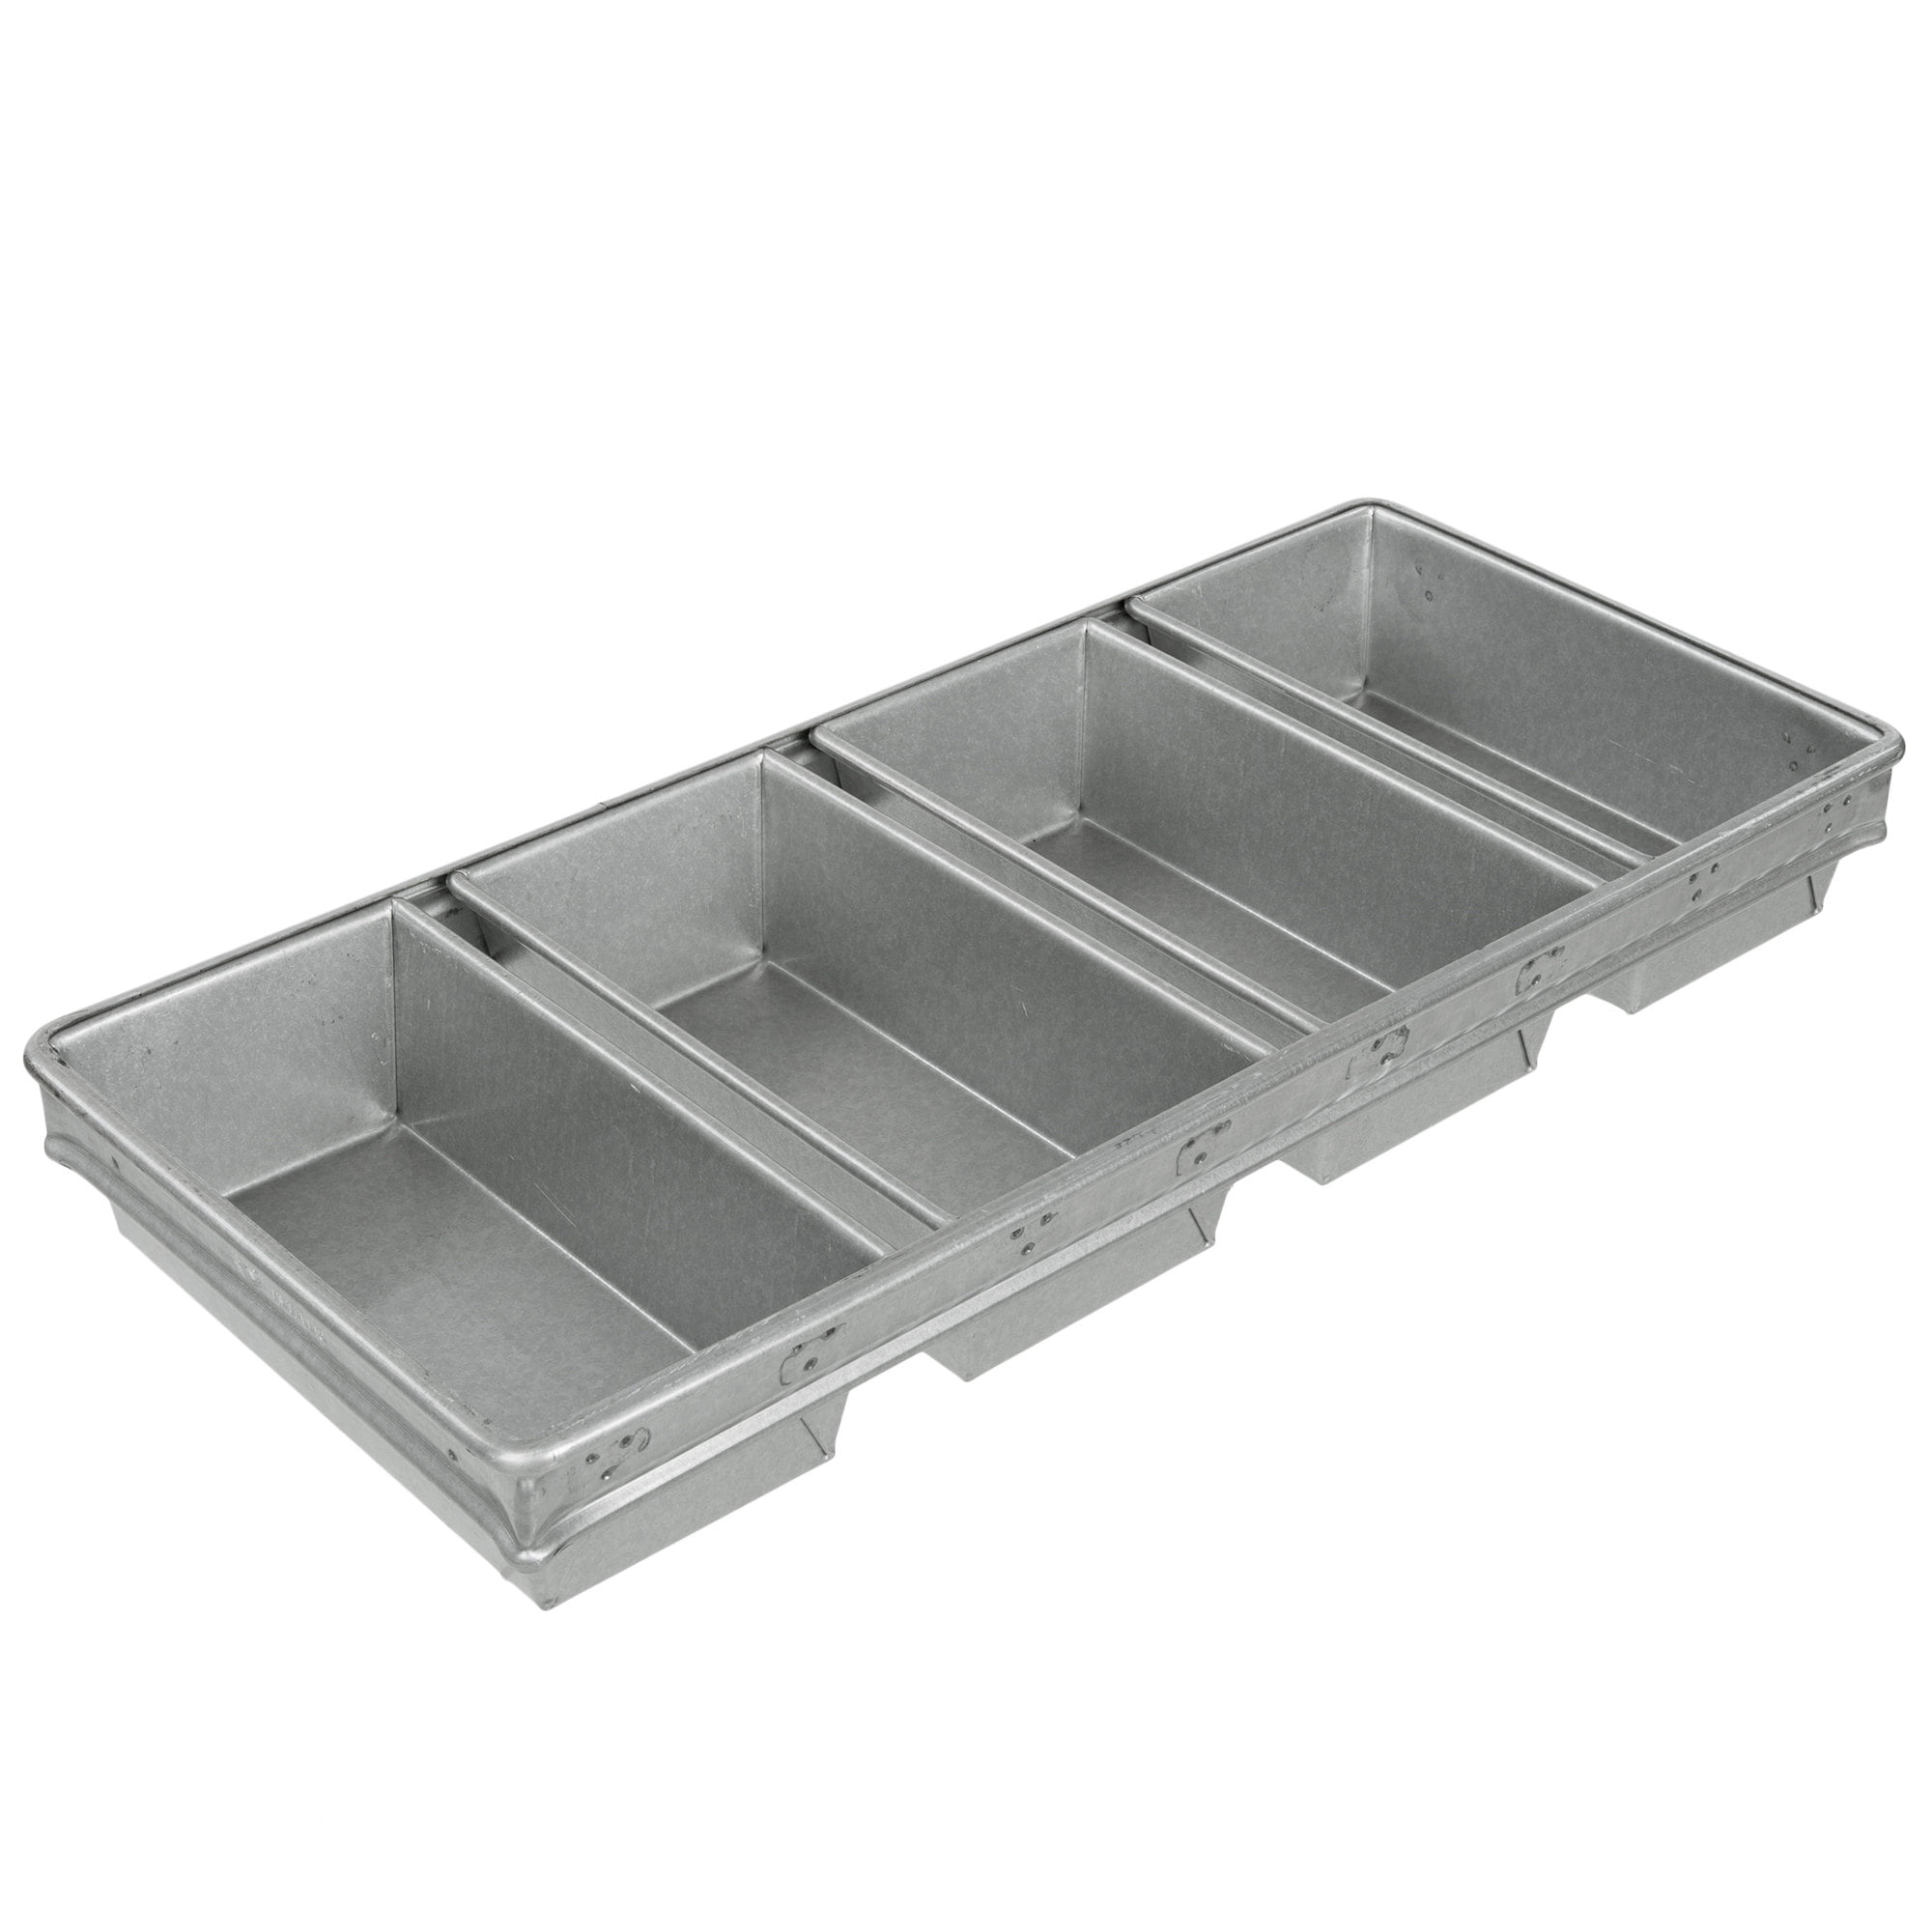 8.5 x 4.5 inch Focus Commerical Bakeware 3 Strapped Bread Pans 